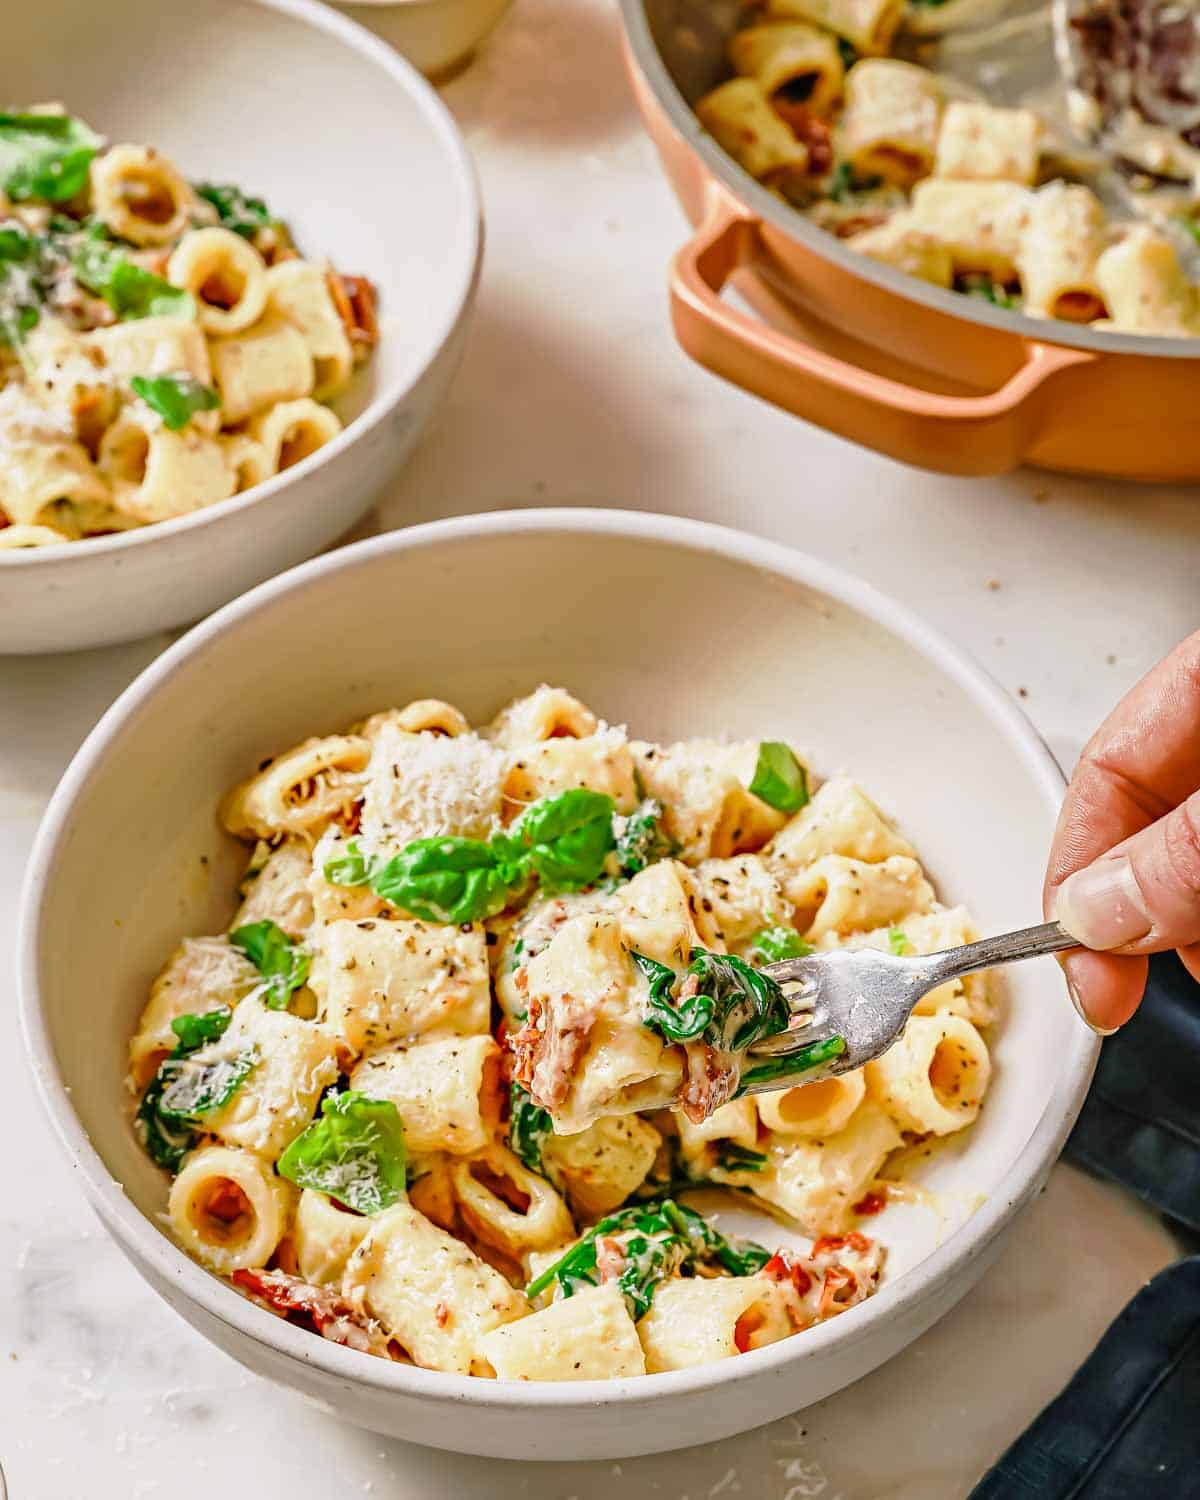 A bowl of creamy sun-dried tomato pasta garnished with herbs, being eaten with a fork.